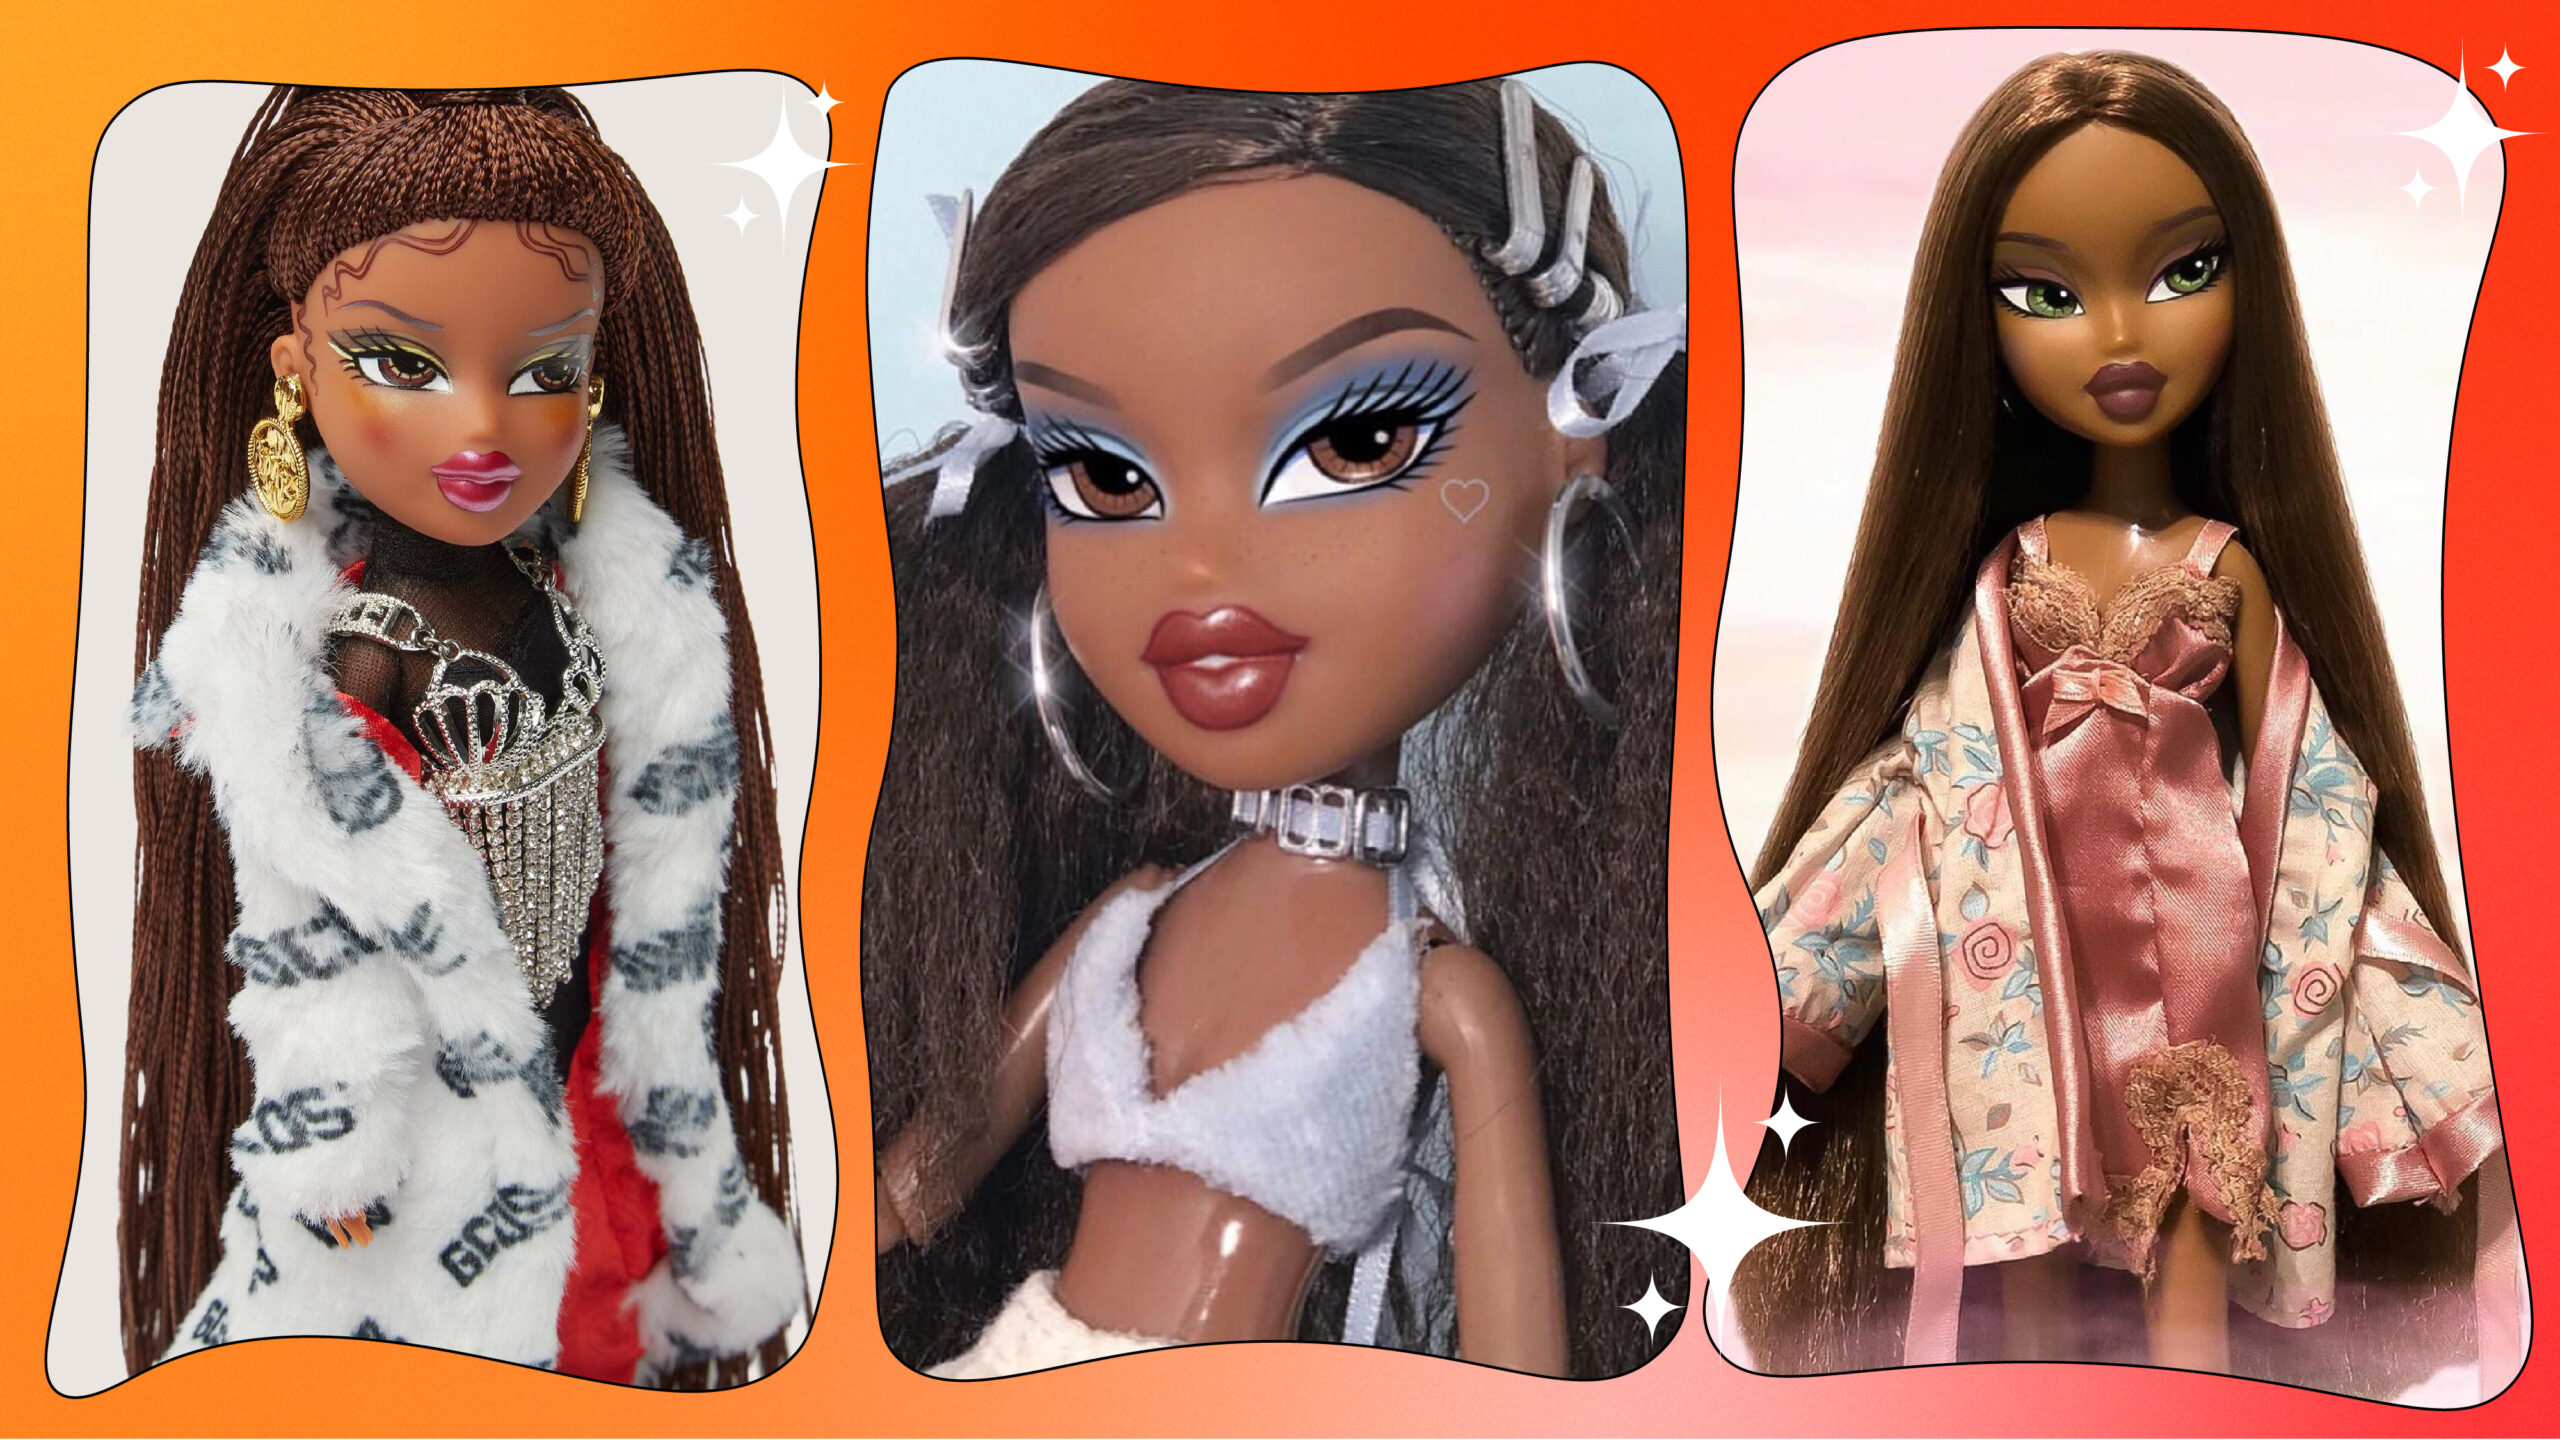 Barbie Doll Clothing Store! Making a Trendy Gen Z Boutique For Barbie & Ken Doll  Fashion 